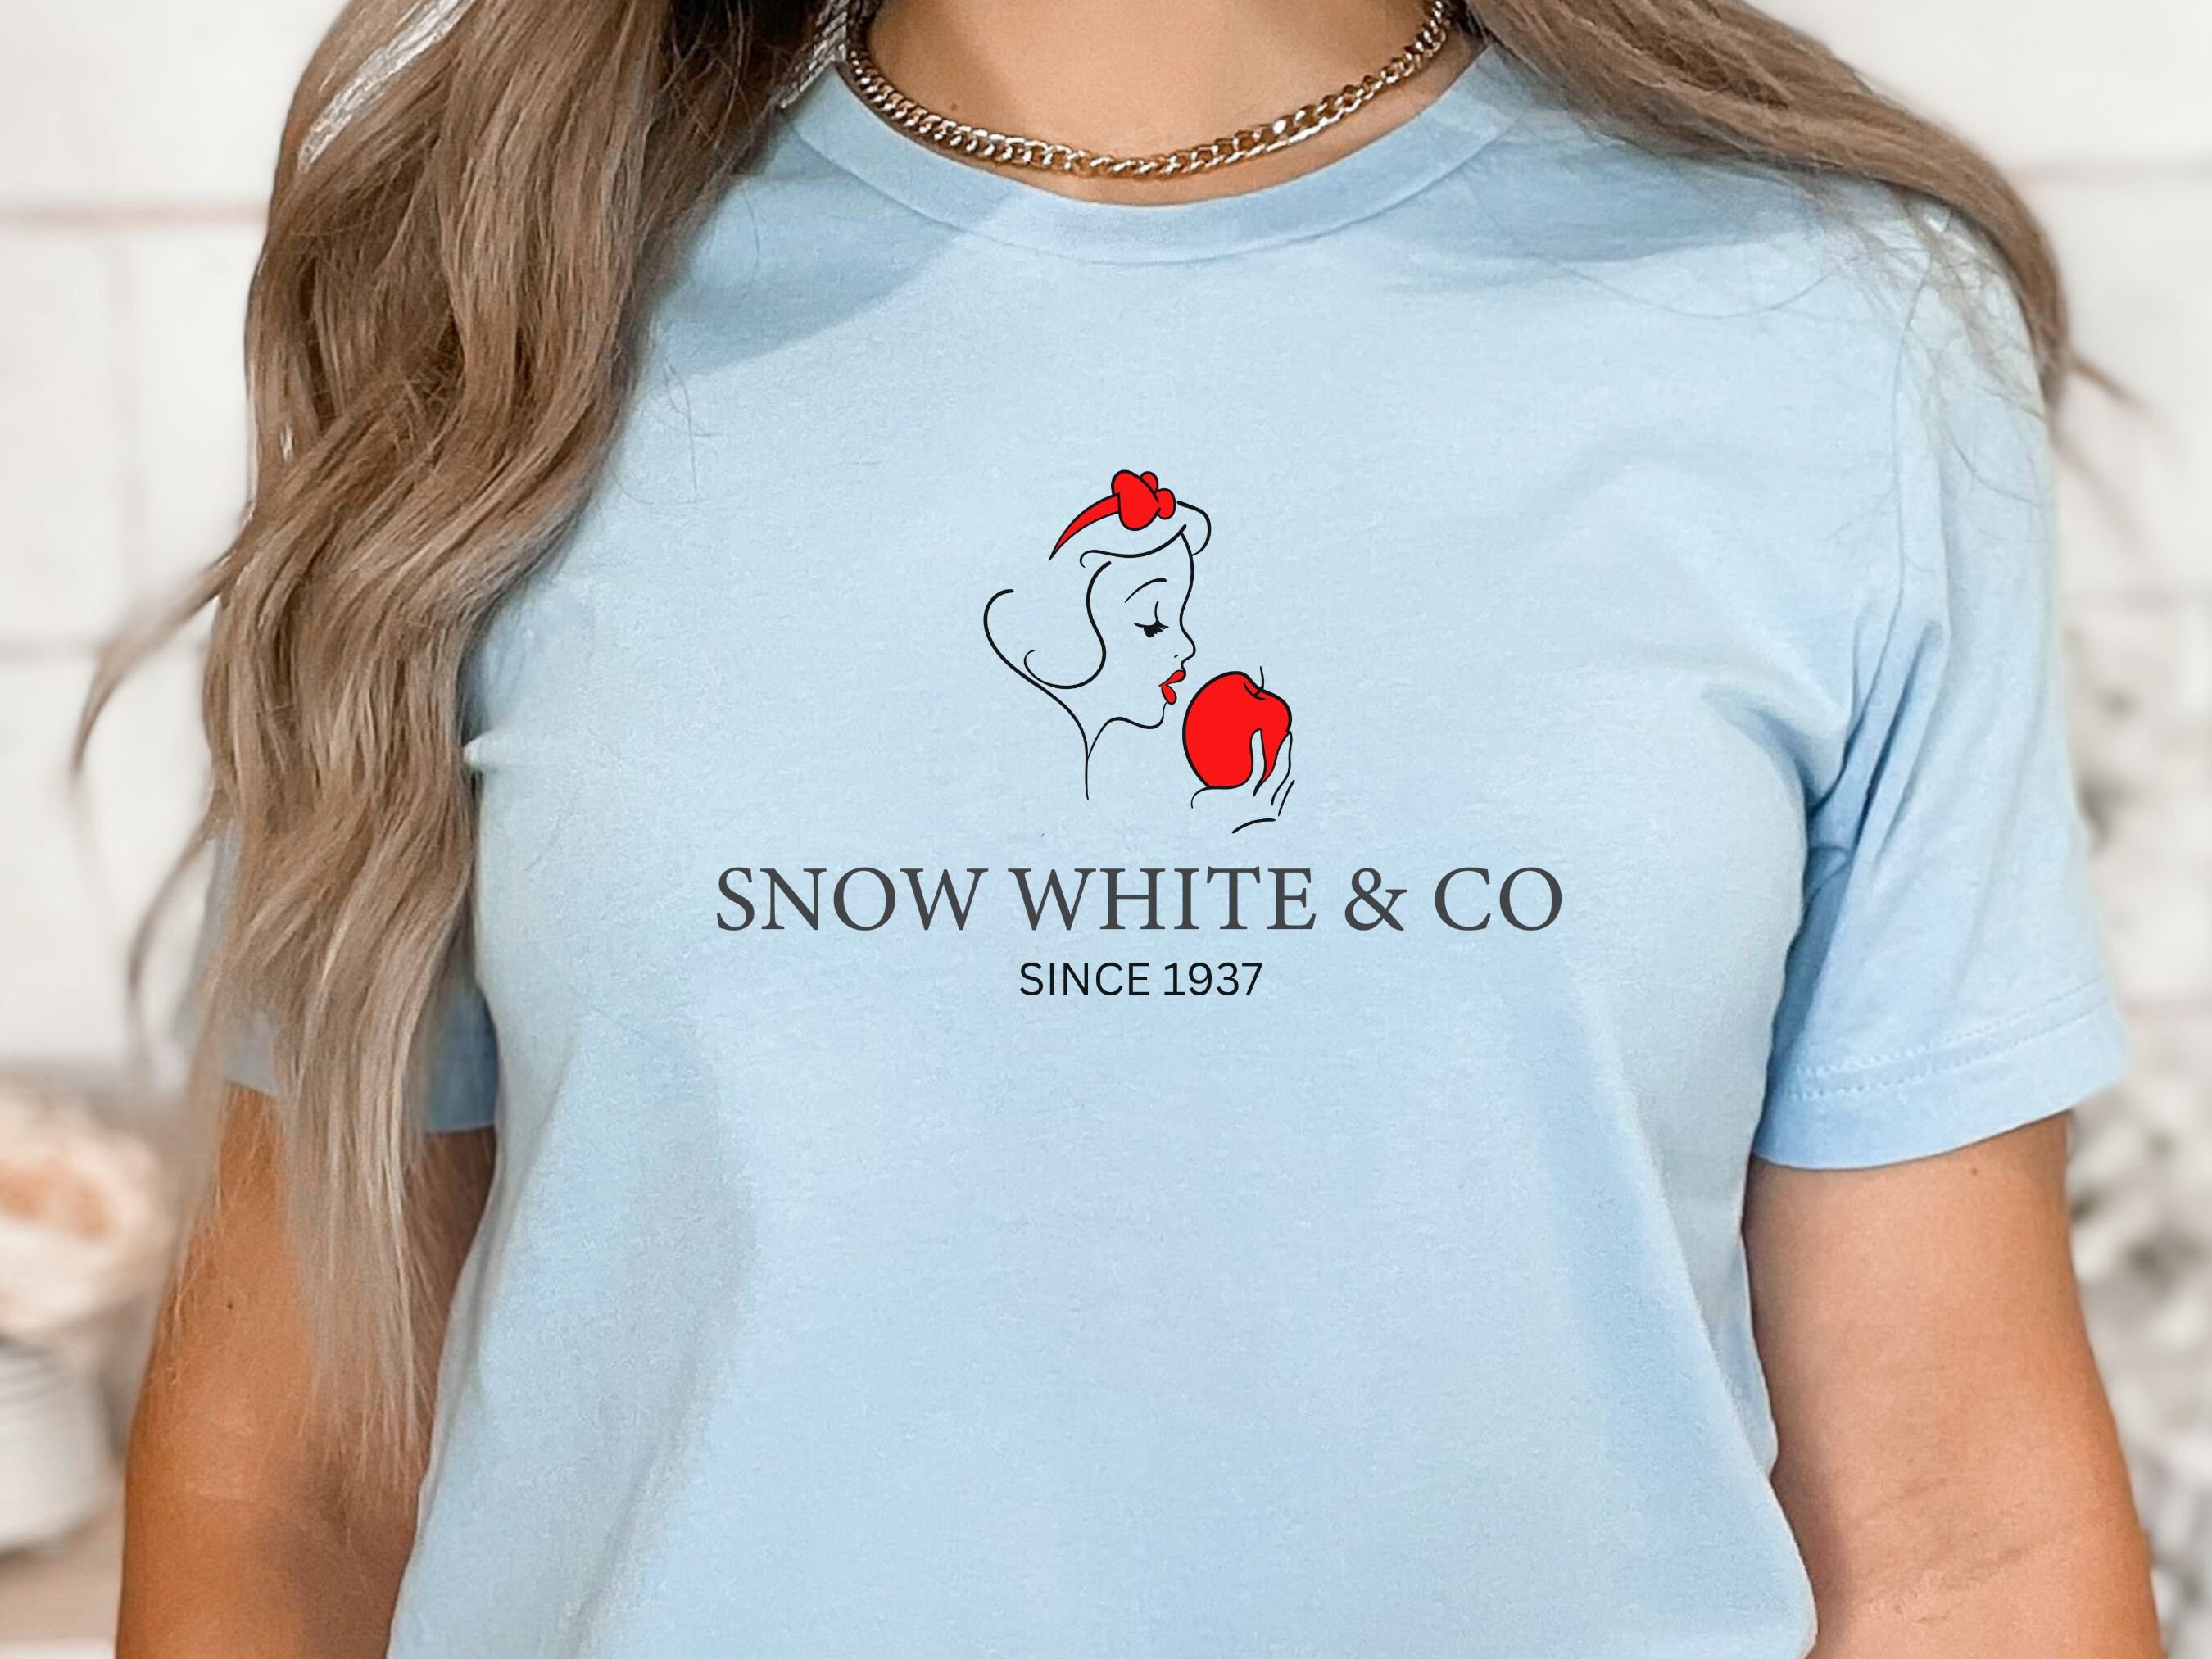 Snow White Shirt, Snow White and Co T-shirt, Princess Snow White Tee,  Fairest of Them All, Magic Kingdom Shirt, Princess Party Gift - Etsy